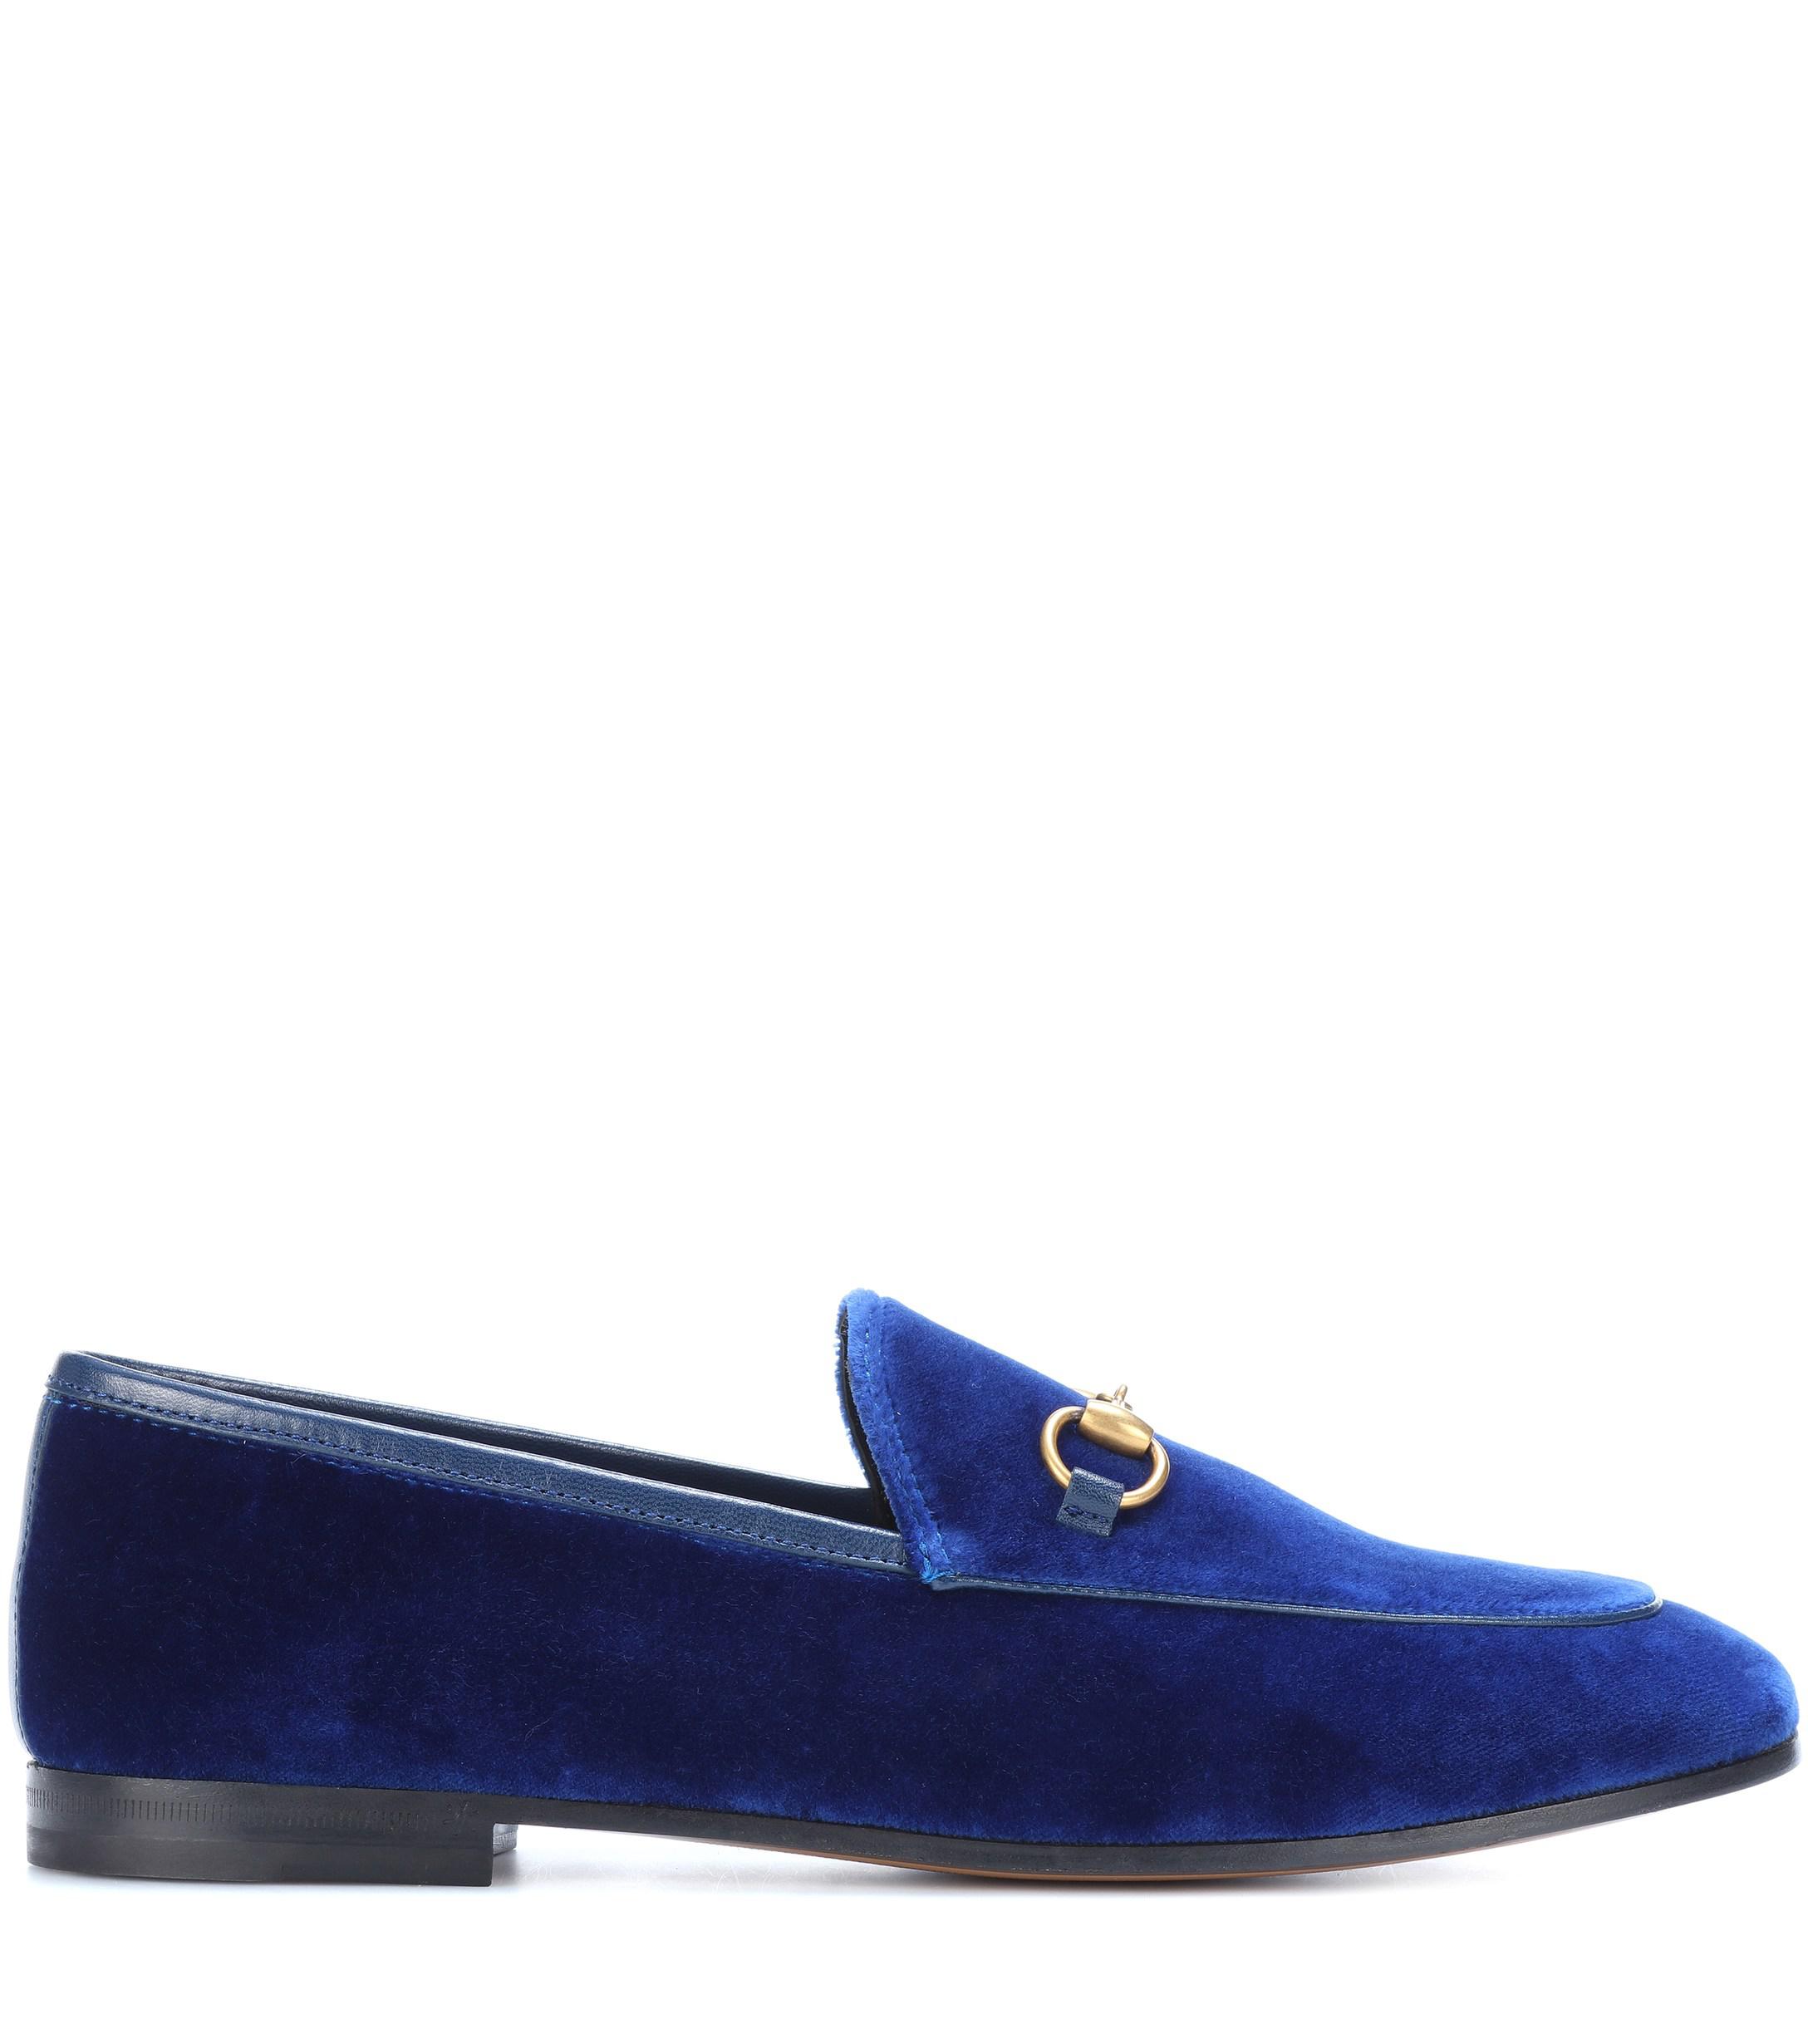 Gucci Blue Velvet Loafers with NY Yankees Embroidery - Fleur De Riche